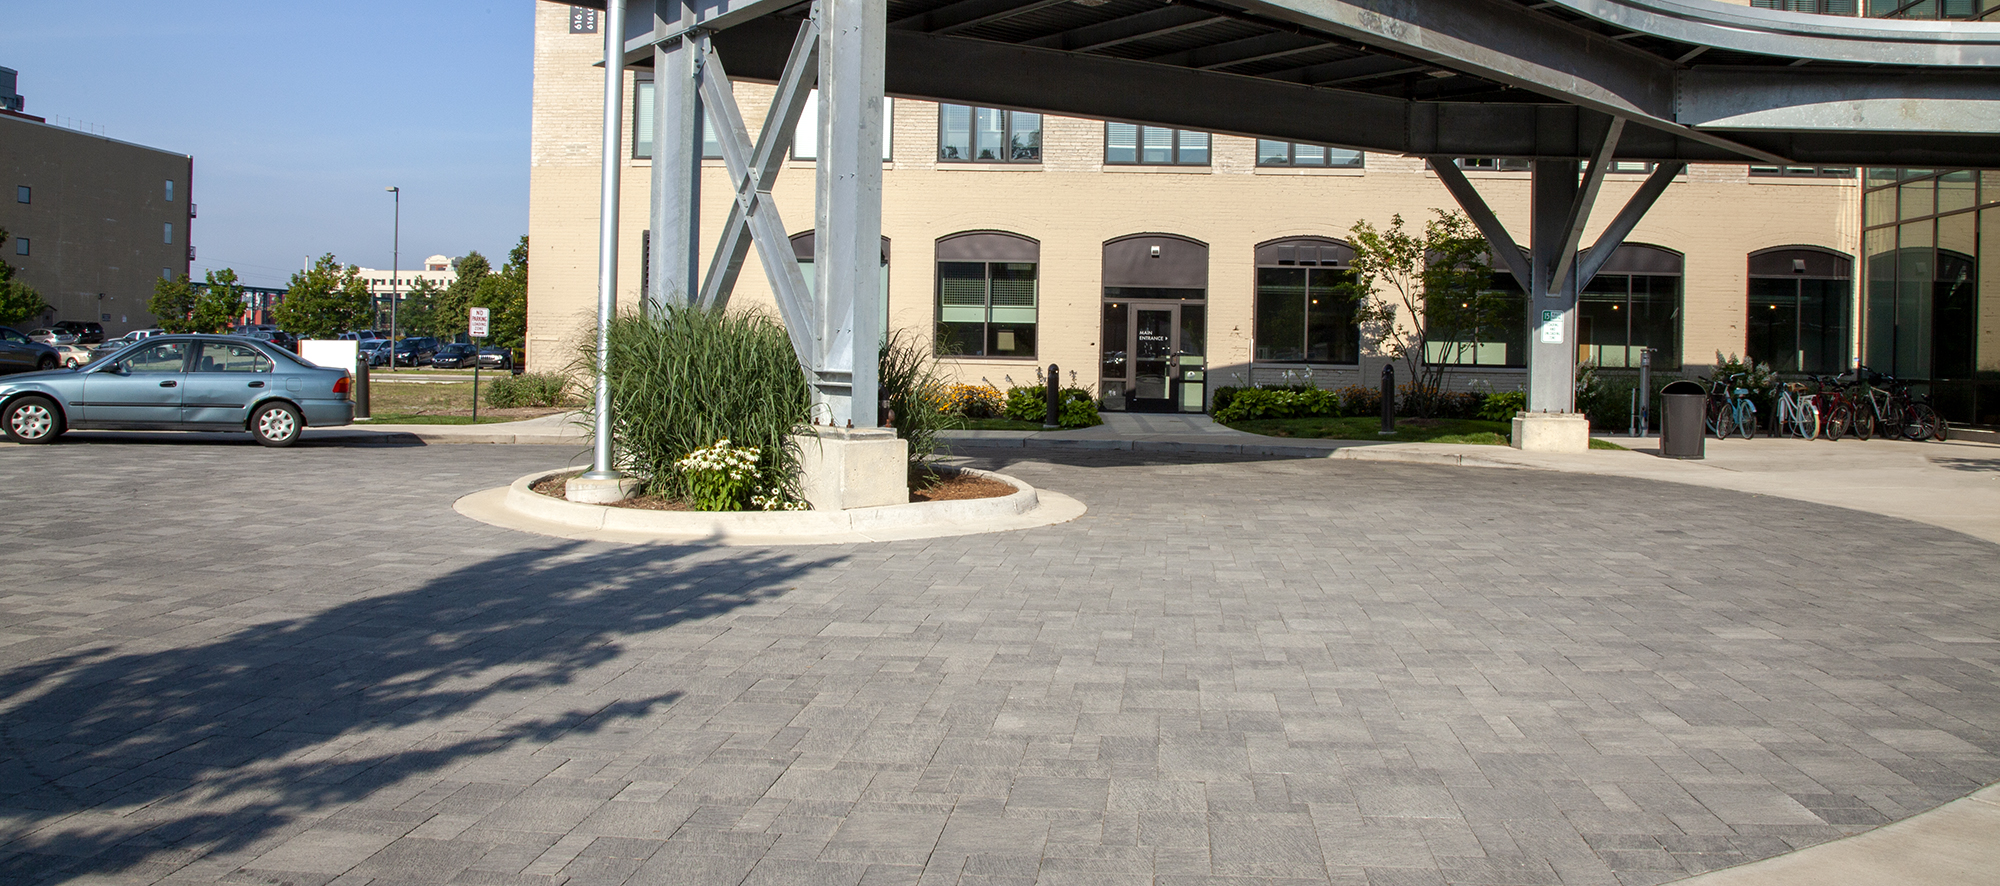 In front of 616 Lofts on Monroe is a circular driveway made from Unilock Il Campo pavers in shades of grey, with landscaping and amenities.